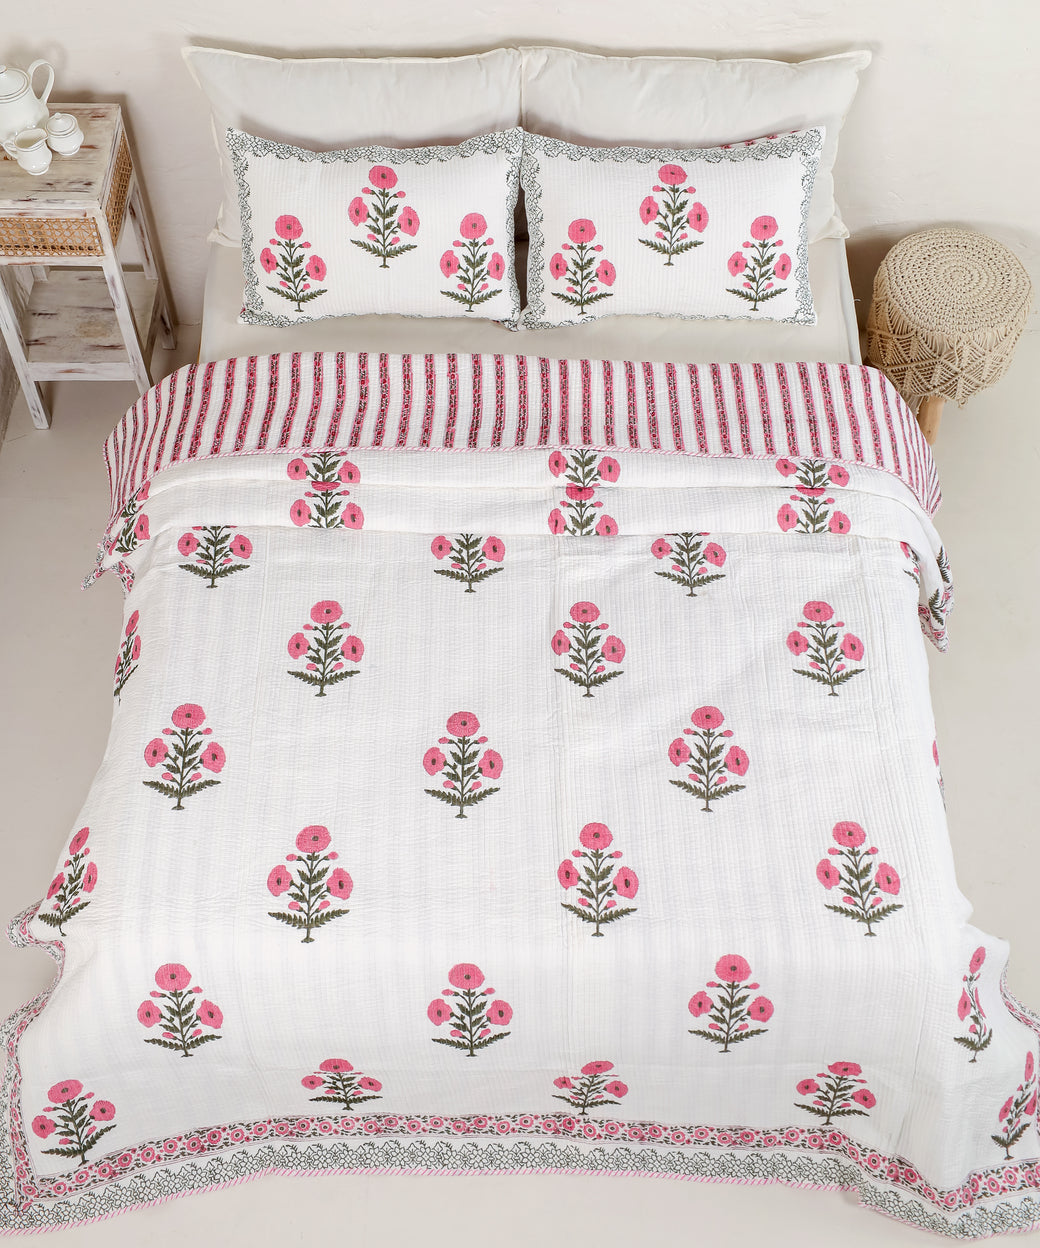 Hand Block Printed Quilt with Pillow Covers - Pink Poppies